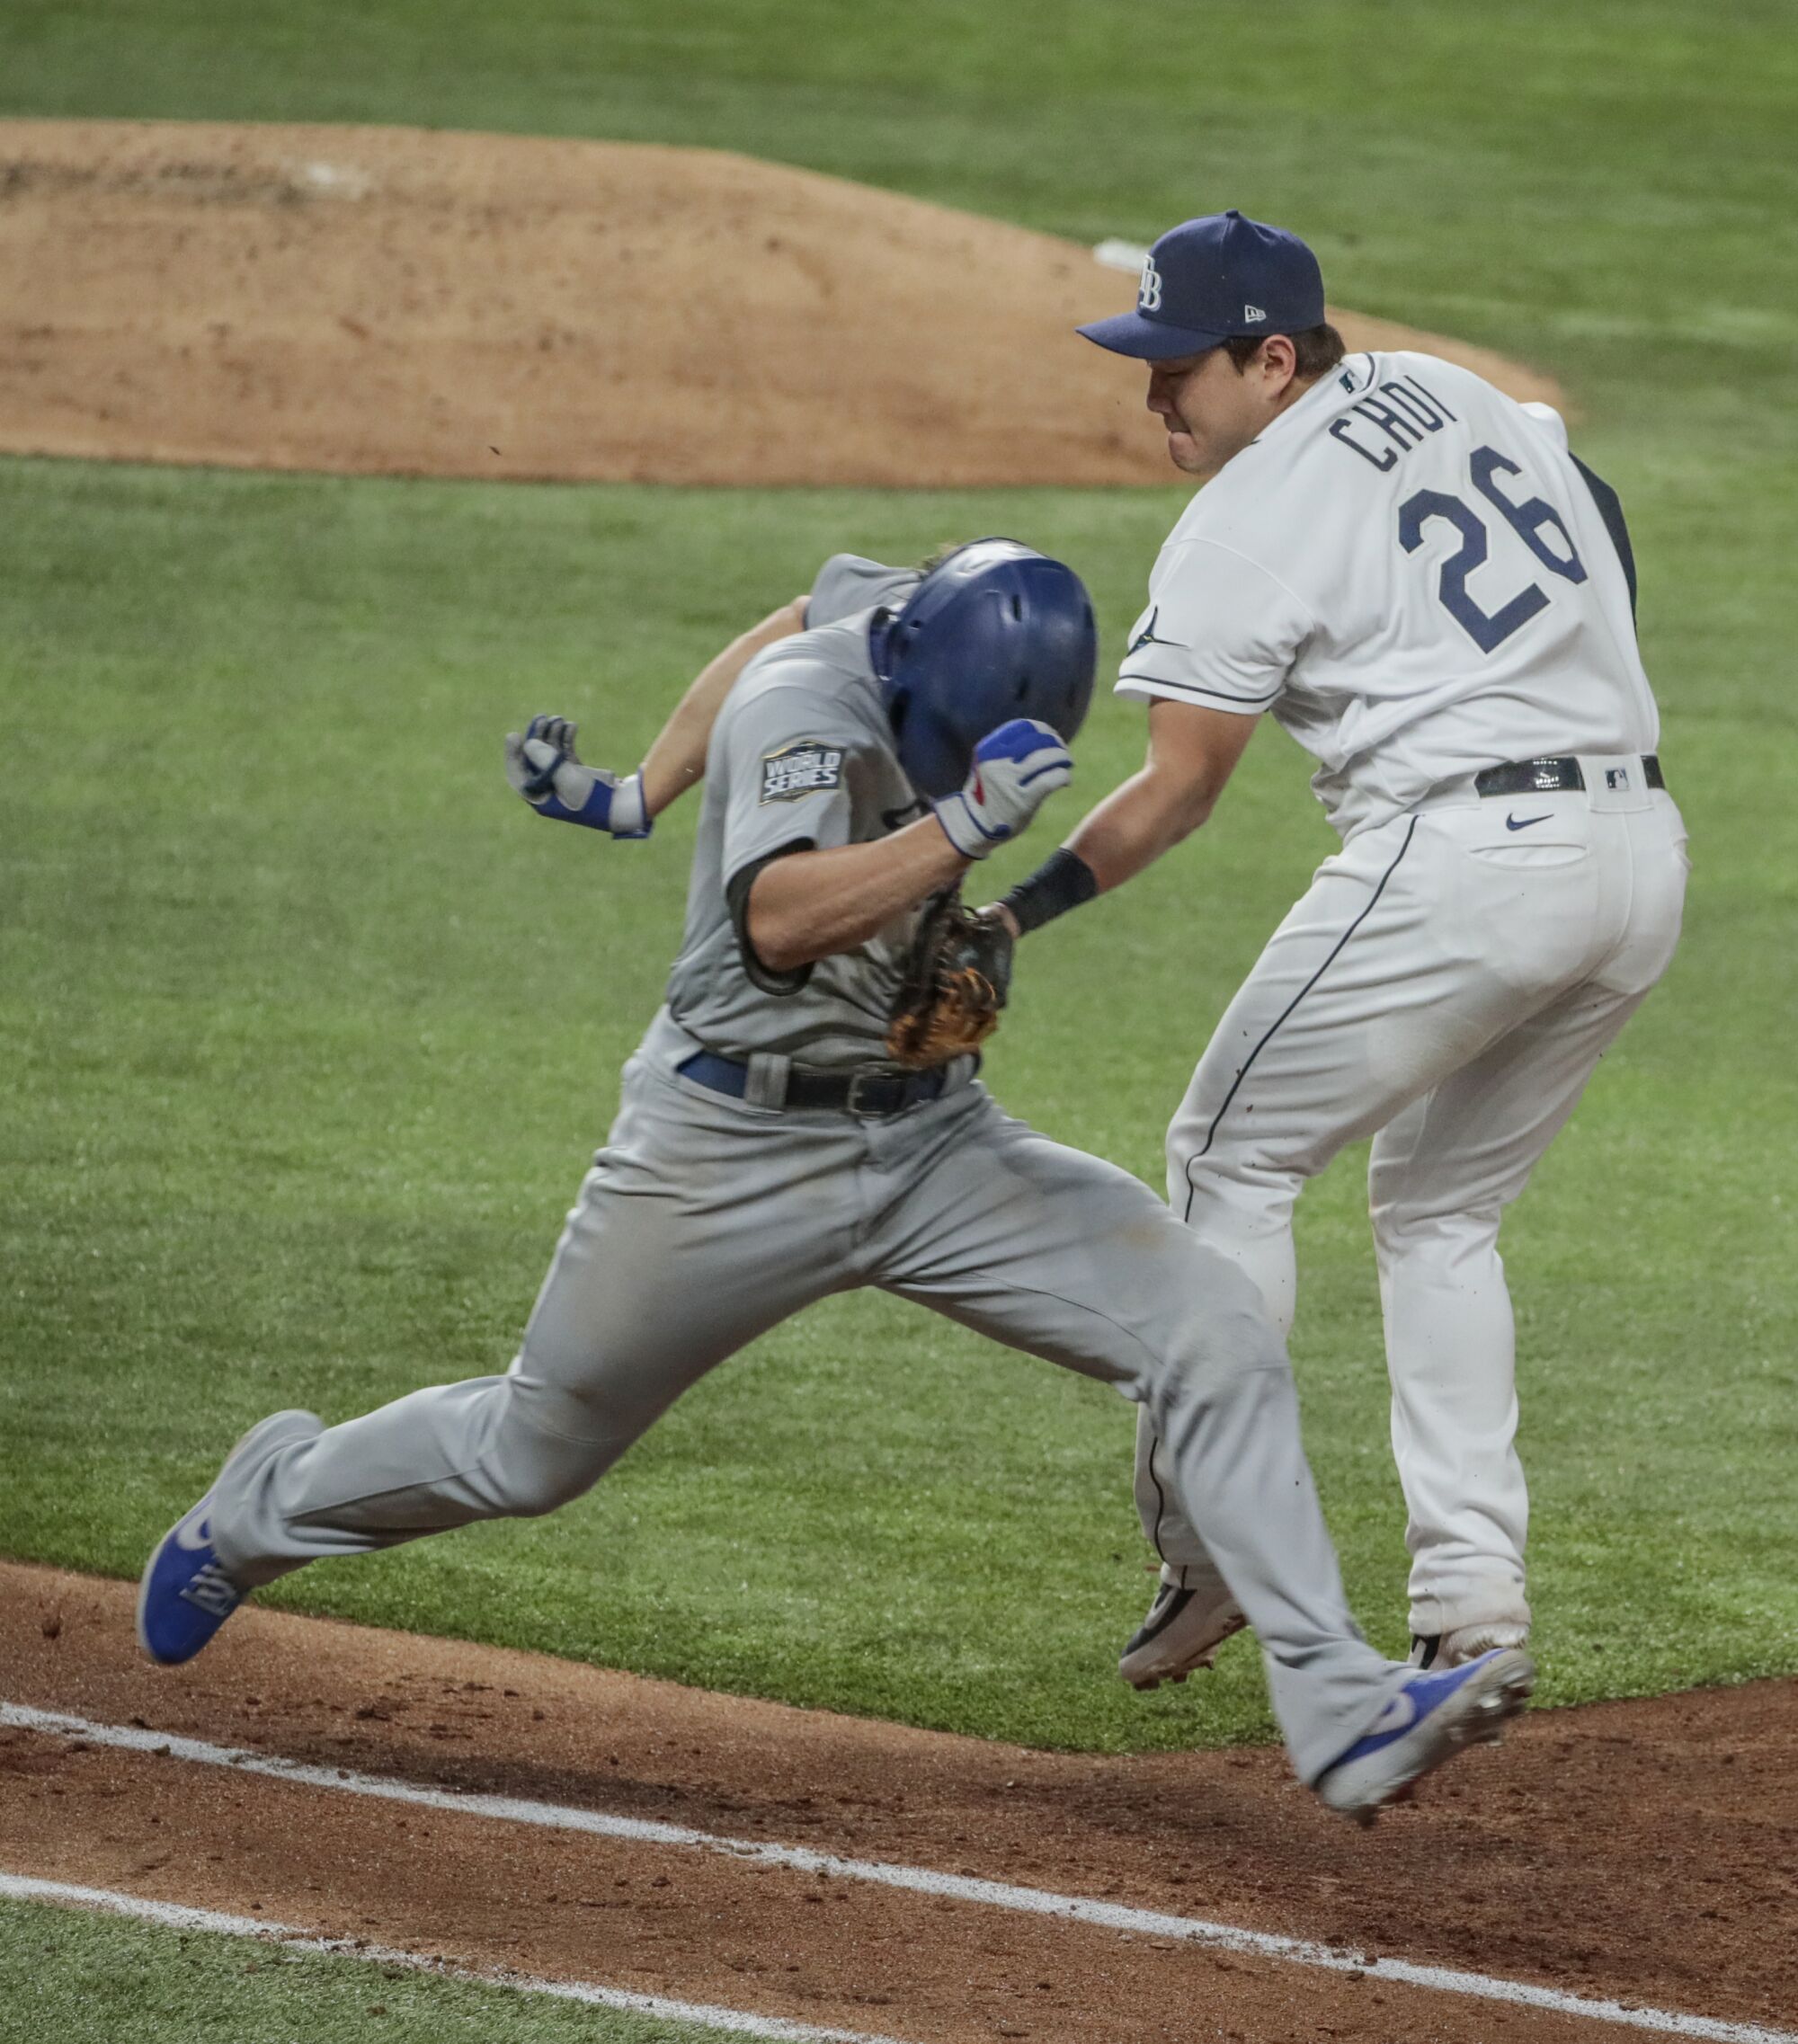 Corey Seager is tagged out by Ji-Man Choi.